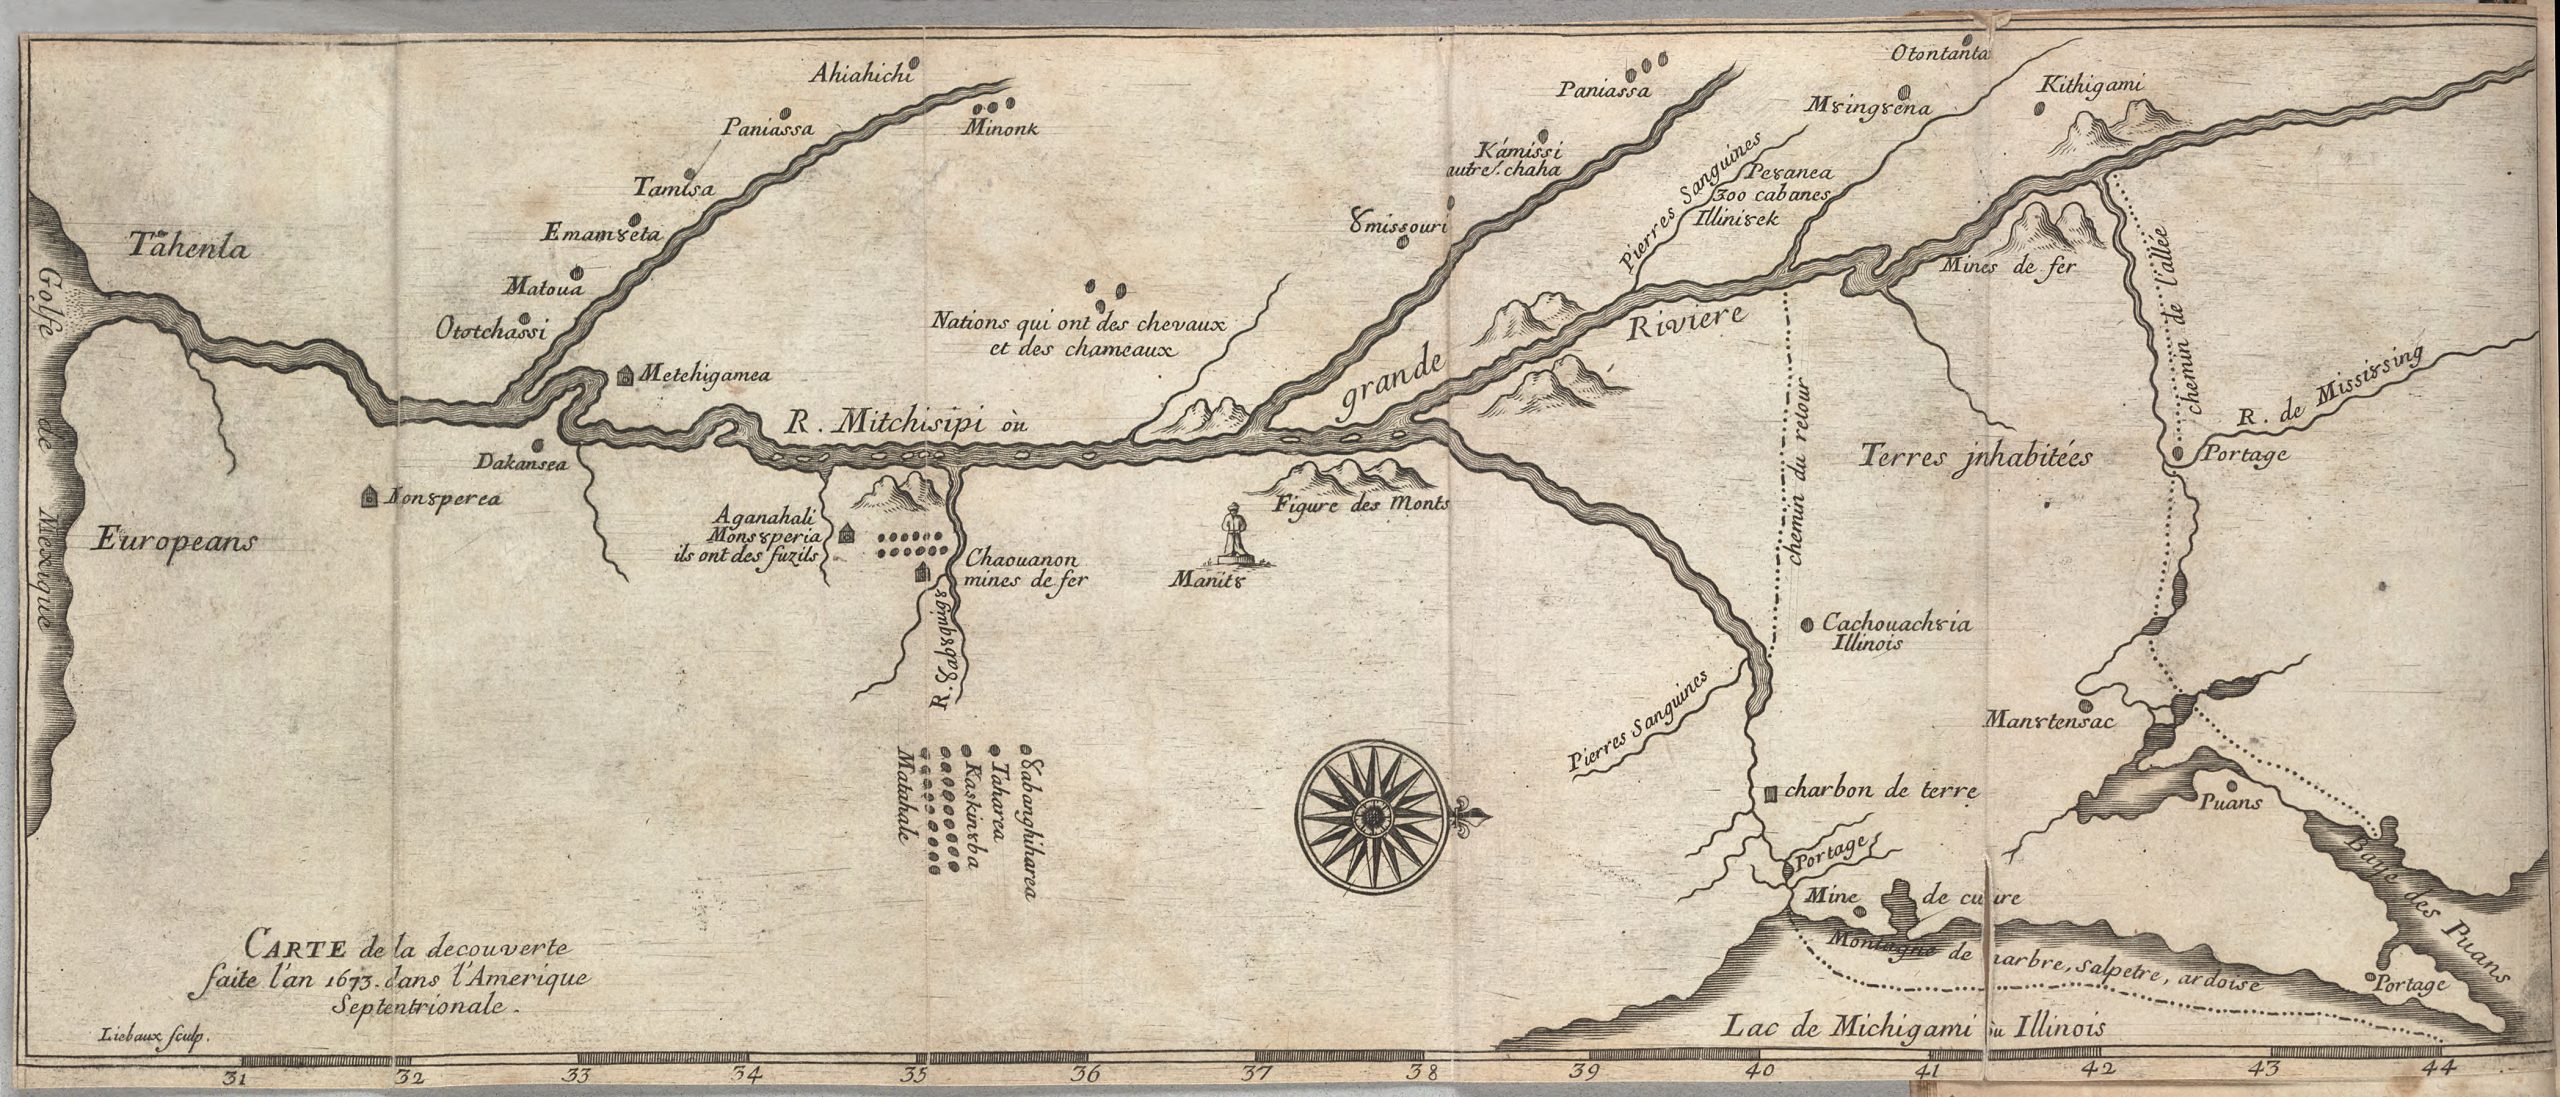 Marquette's map of Mississippi